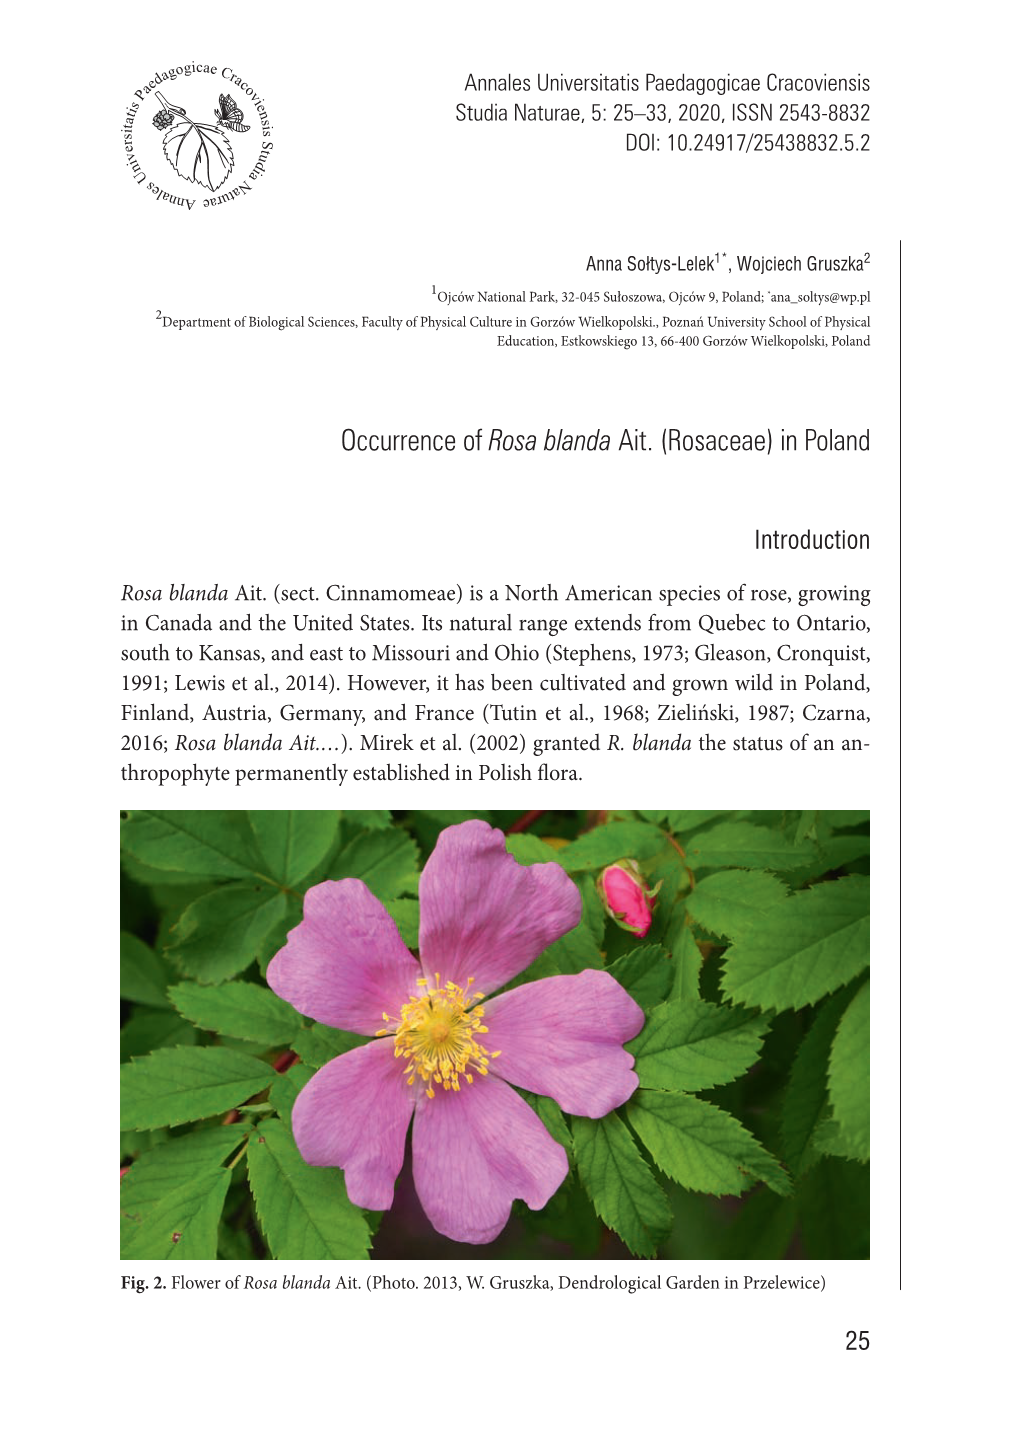 Occurrence of Rosa Blanda Ait. (Rosaceae) in Poland